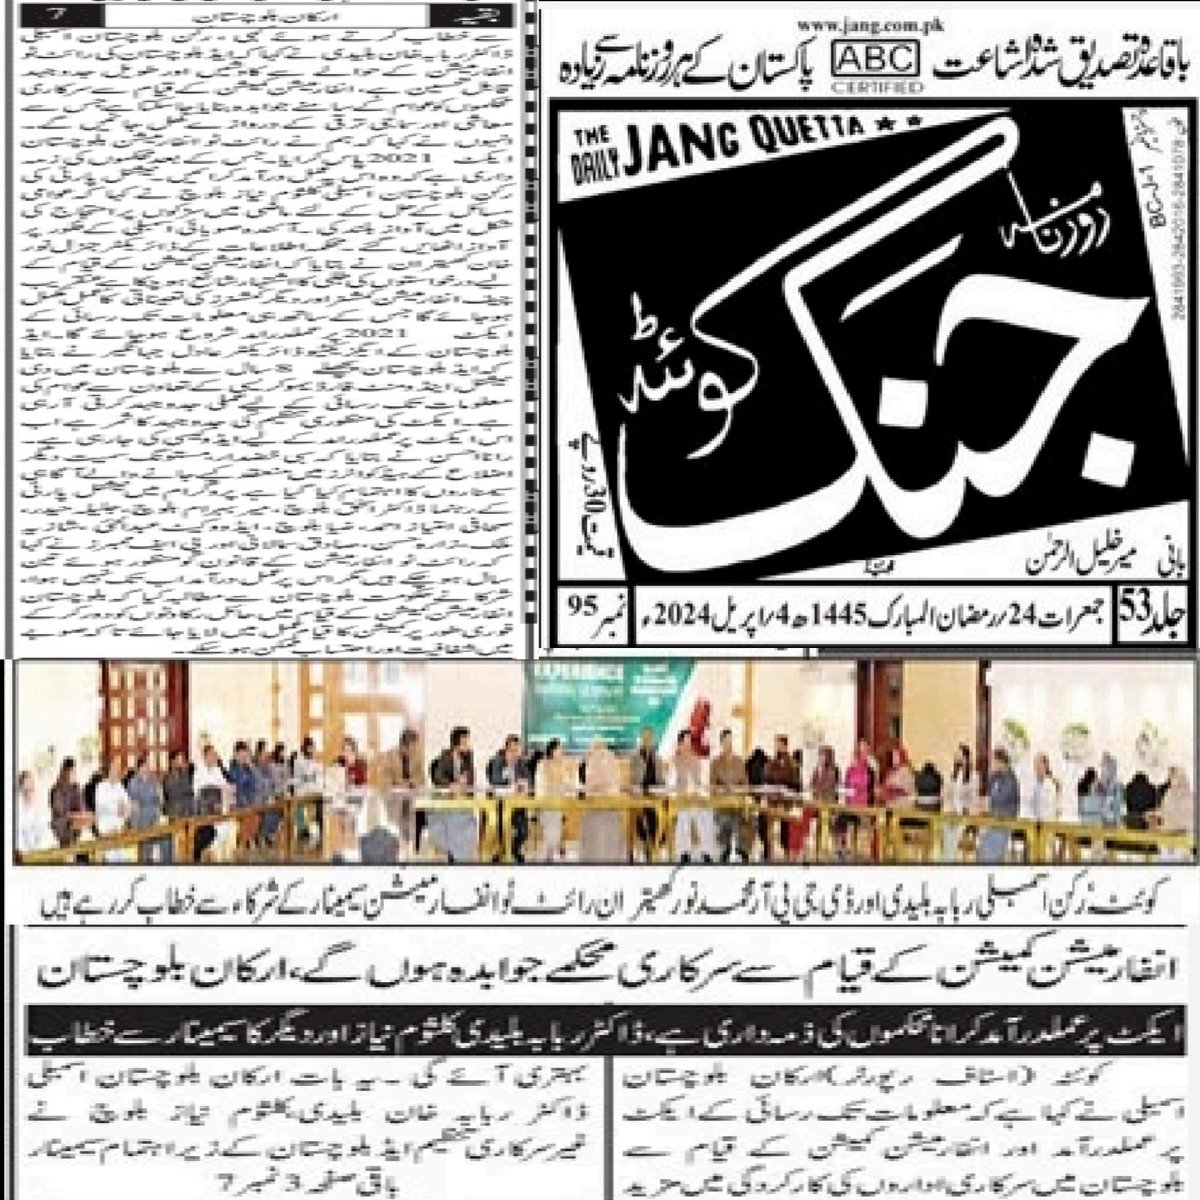 Thanks to @jang_akhbar for this huge coverage on our Experience Sharing Seminar. Hope @CMOBalochistan will consider our request of establishment of the RTI Commission. @Dr_RubabaBuledi @dpr_gob @TheRazaAliS @SaddiaMazhar @NadeemKhanJourn @MatiullahMati24